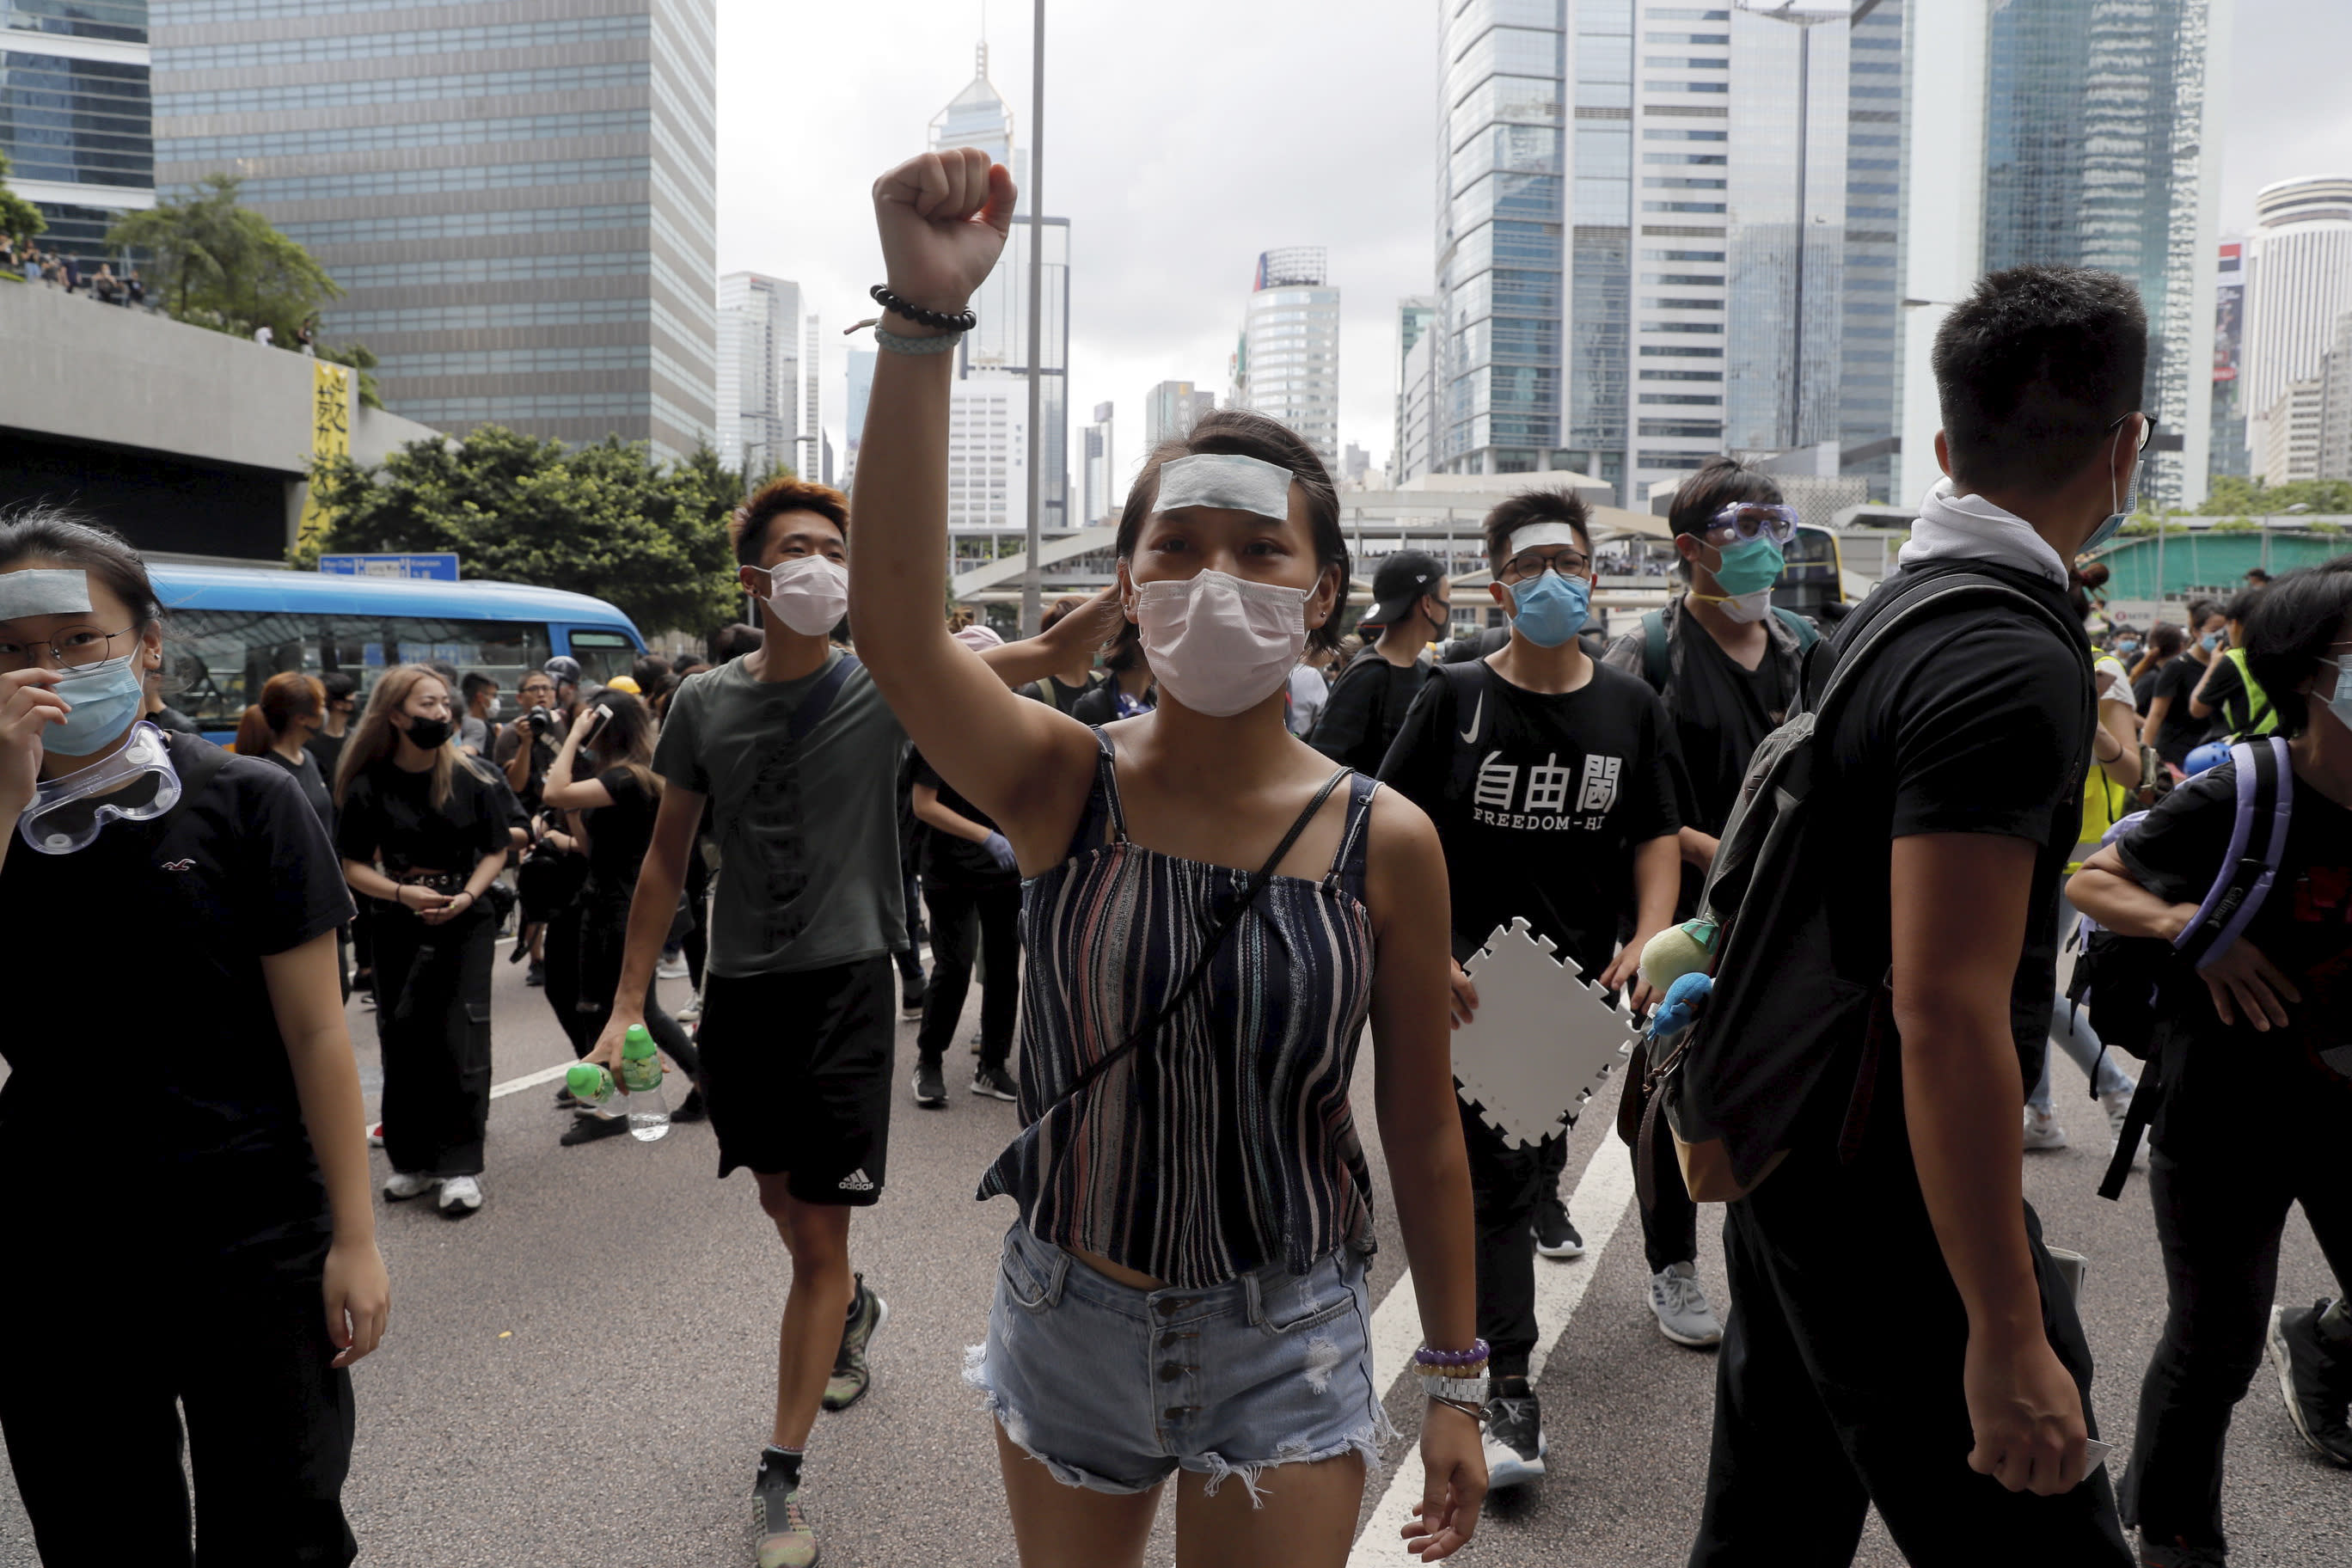 Latest Hong Kong protest  ends peacefully with demands unmet